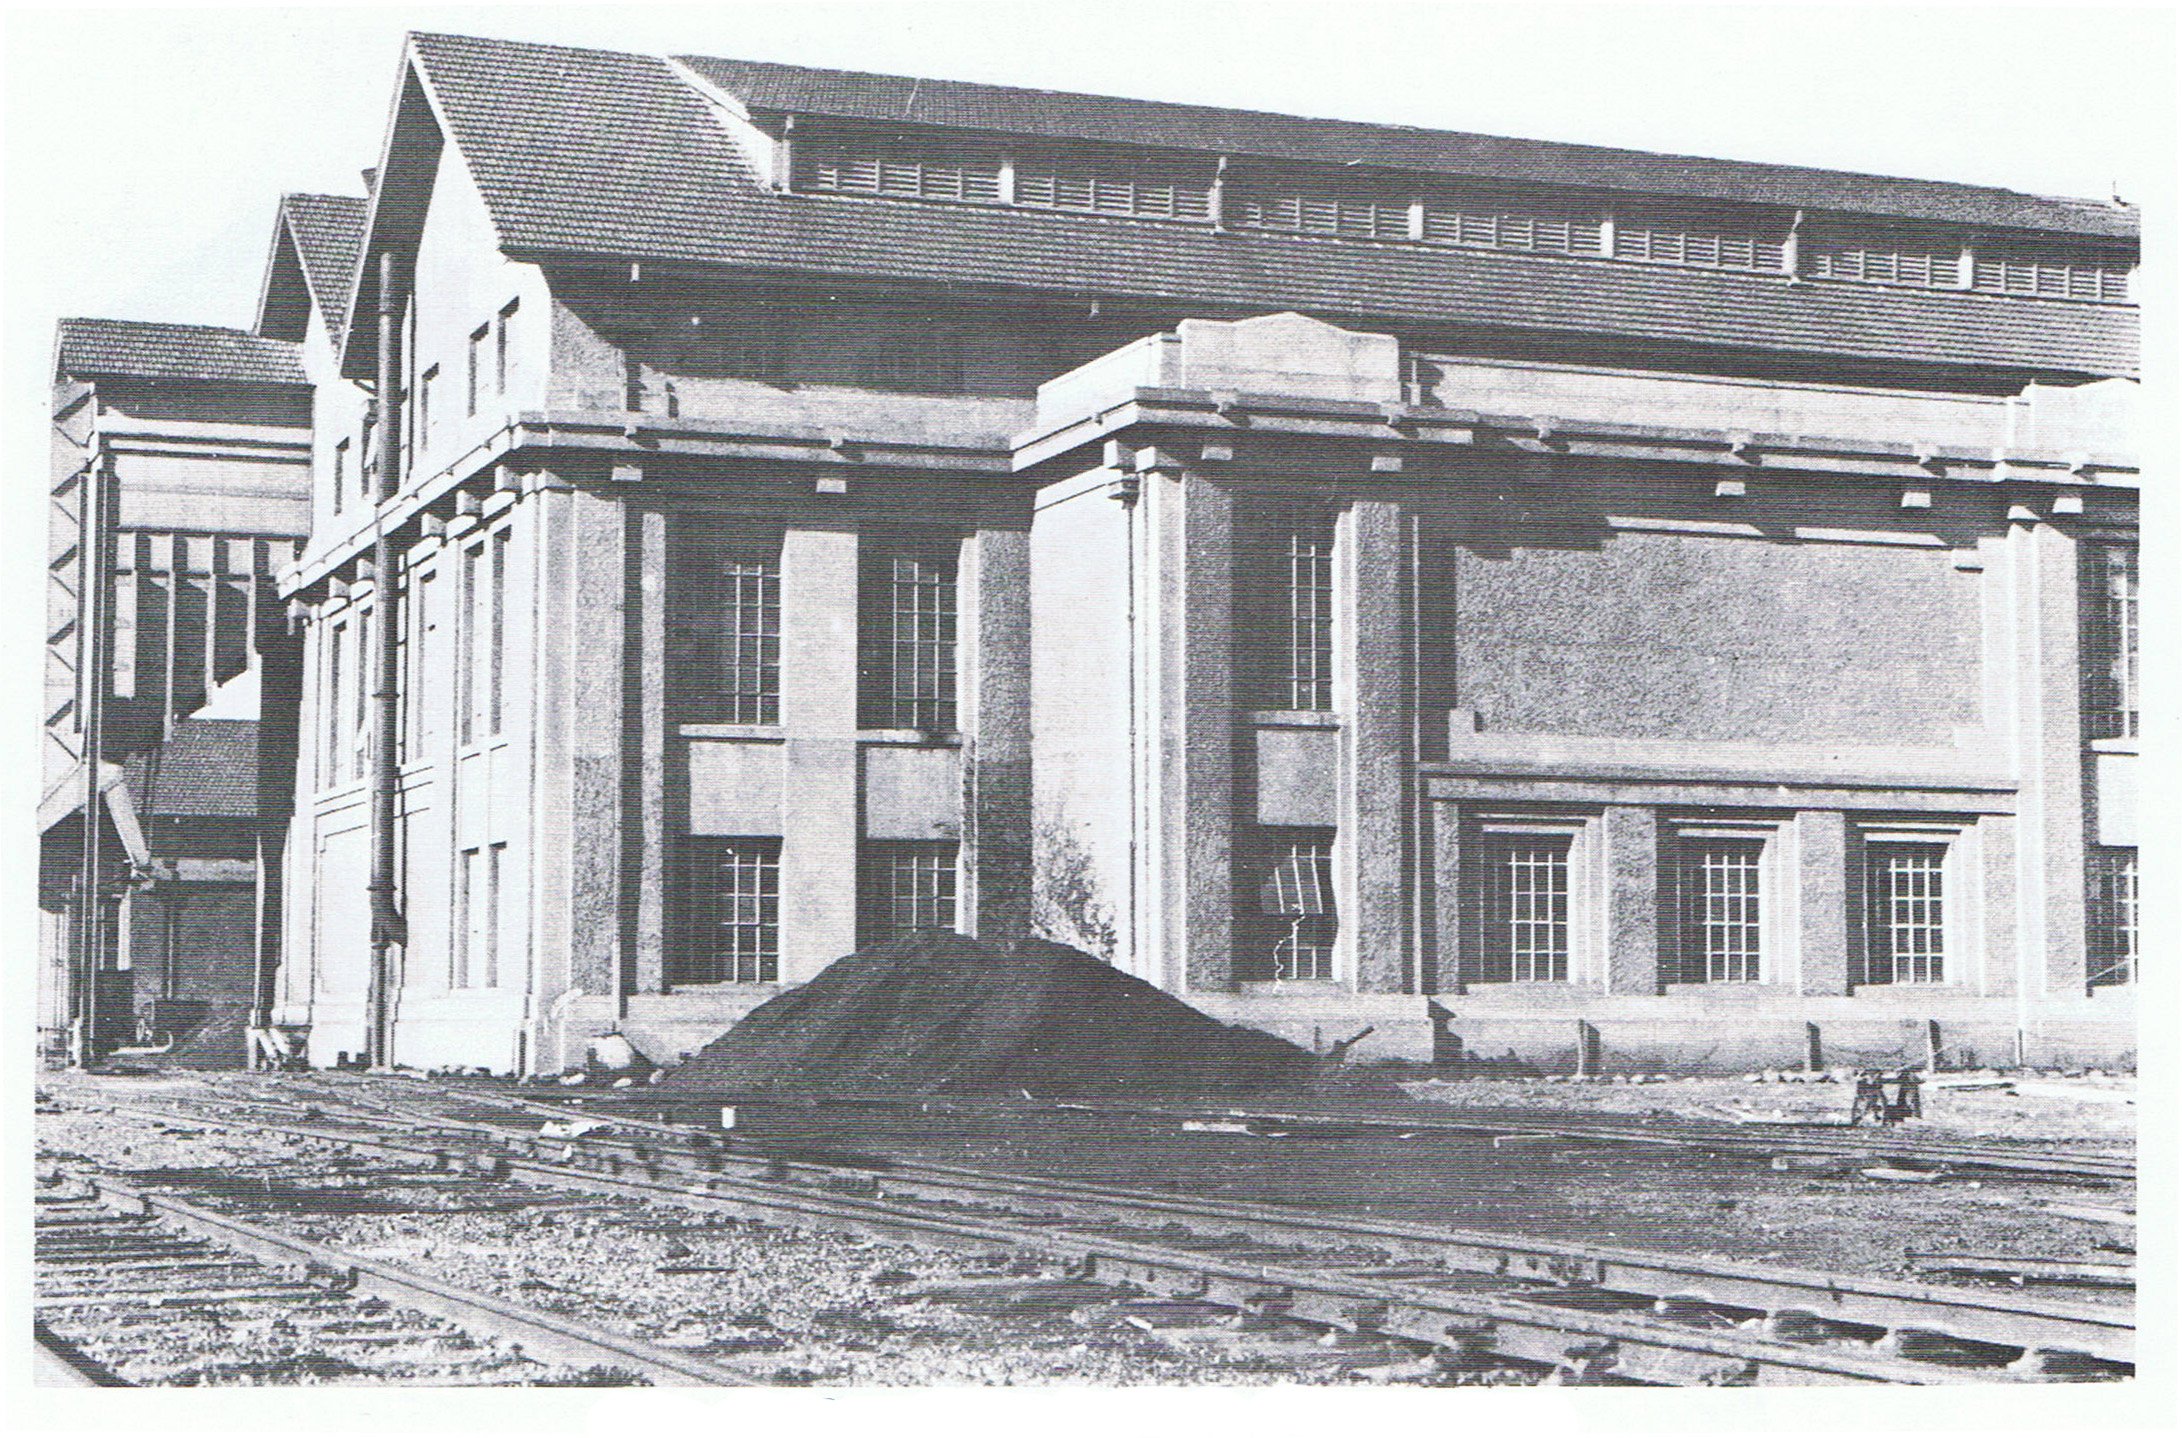 Power Station building